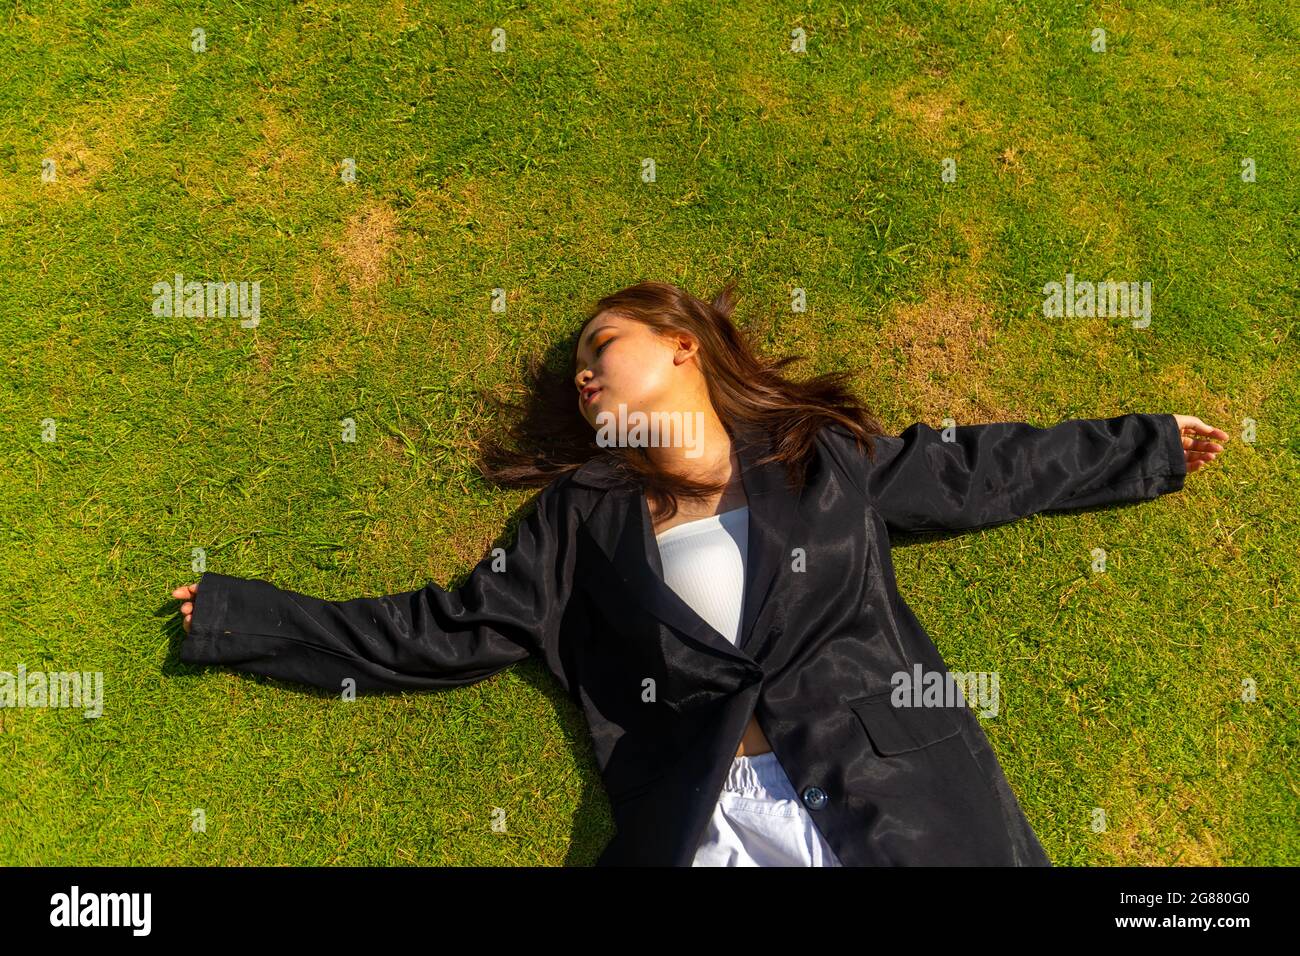 An attractive South Asian female wearing a black formal coat while lying on the ground Stock Photo